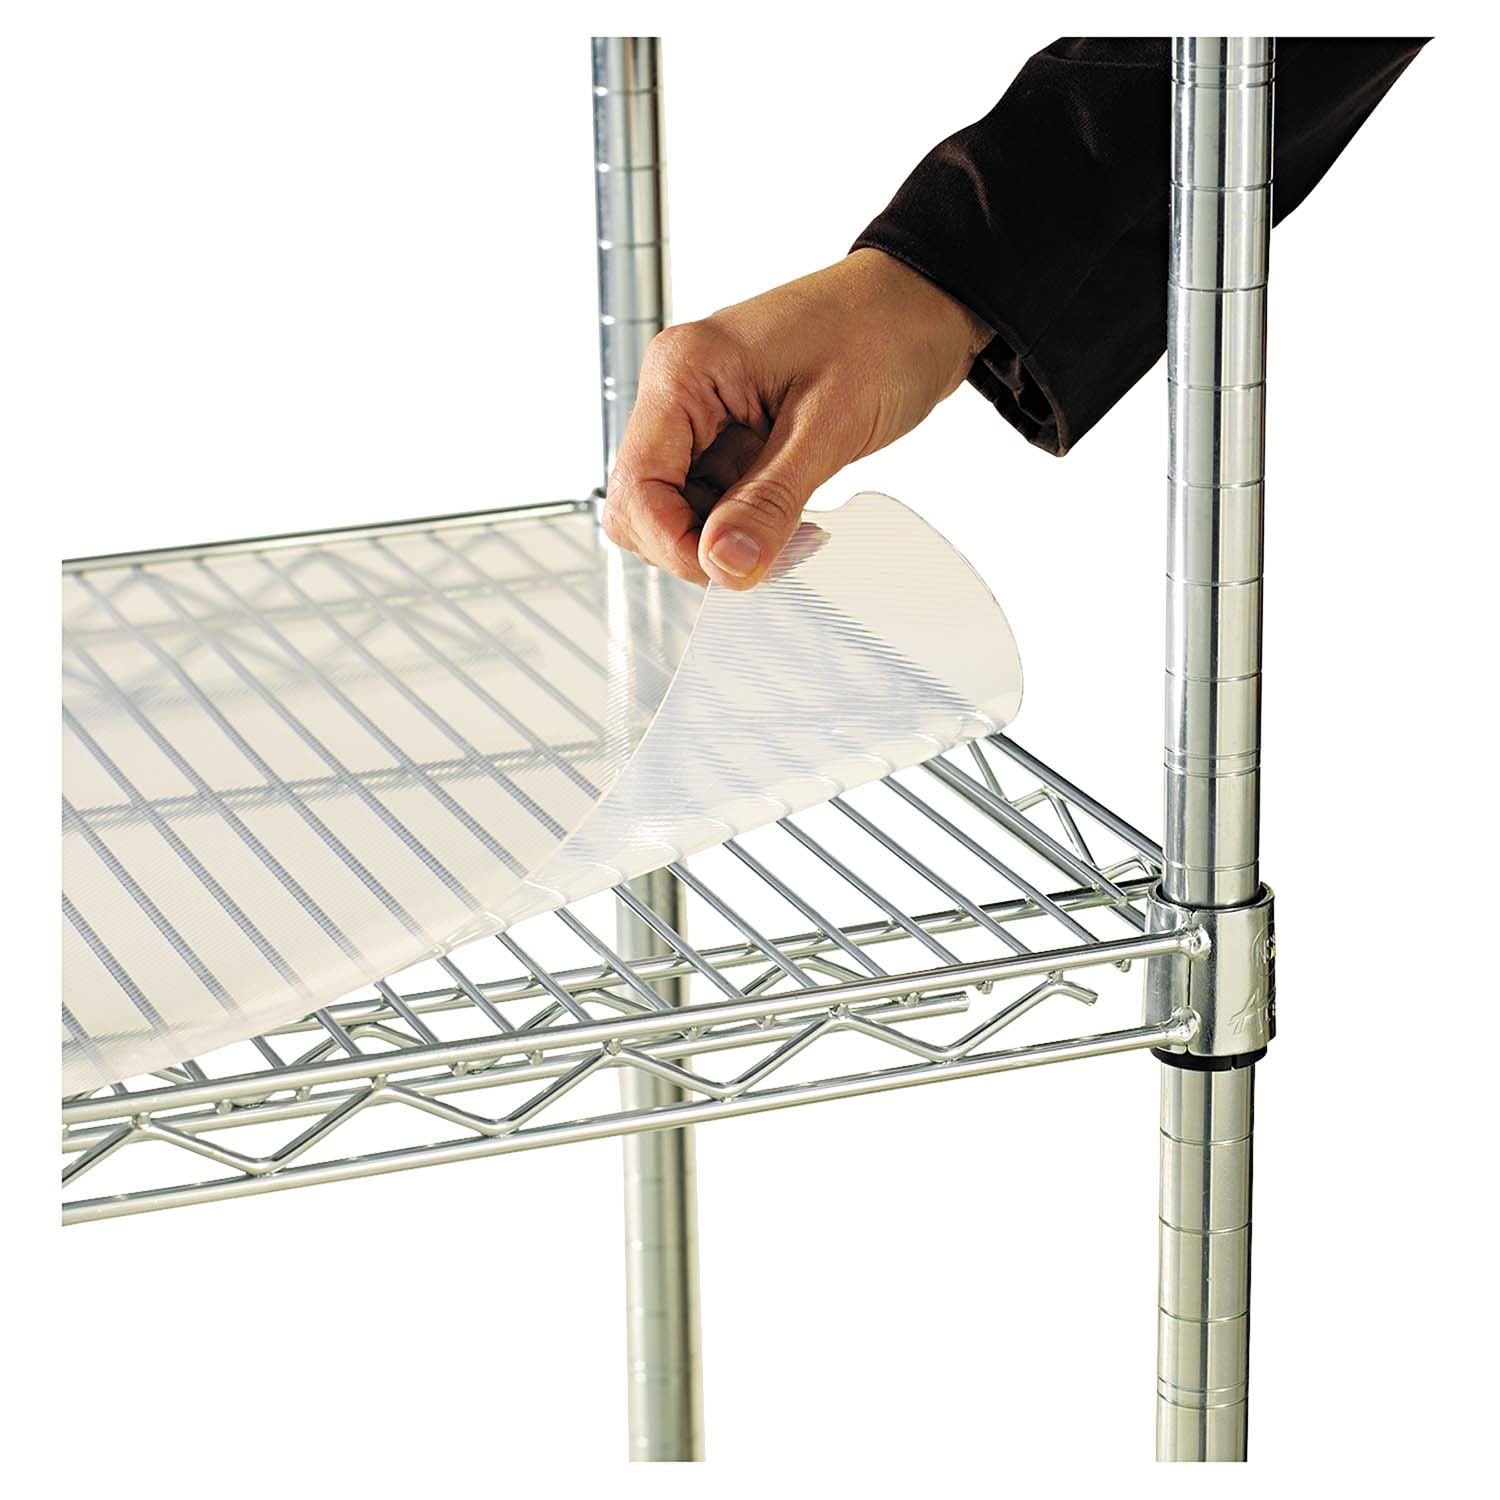 Resilia Shelf Liner Set for Wire Shelving Units – 5 Pack, 14 Inches x 36 Inches, Clear Vinyl, Heavy Duty, Made in The USA